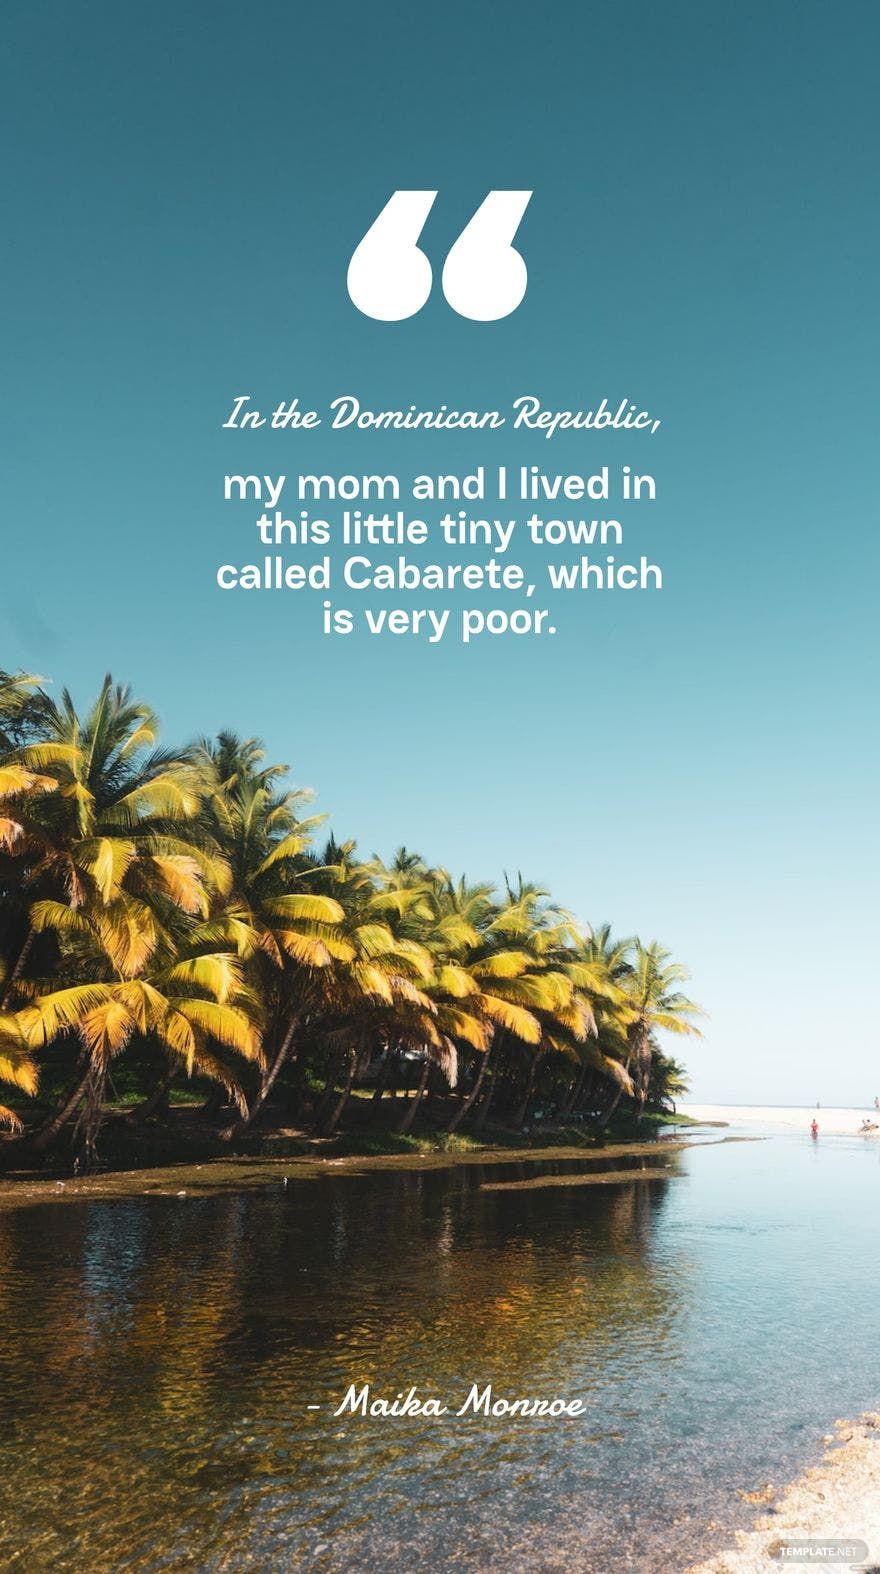 Maika Monroe - In the Dominican Republic, my mom and I lived in this little tiny town called Cabarete, which is very poor.